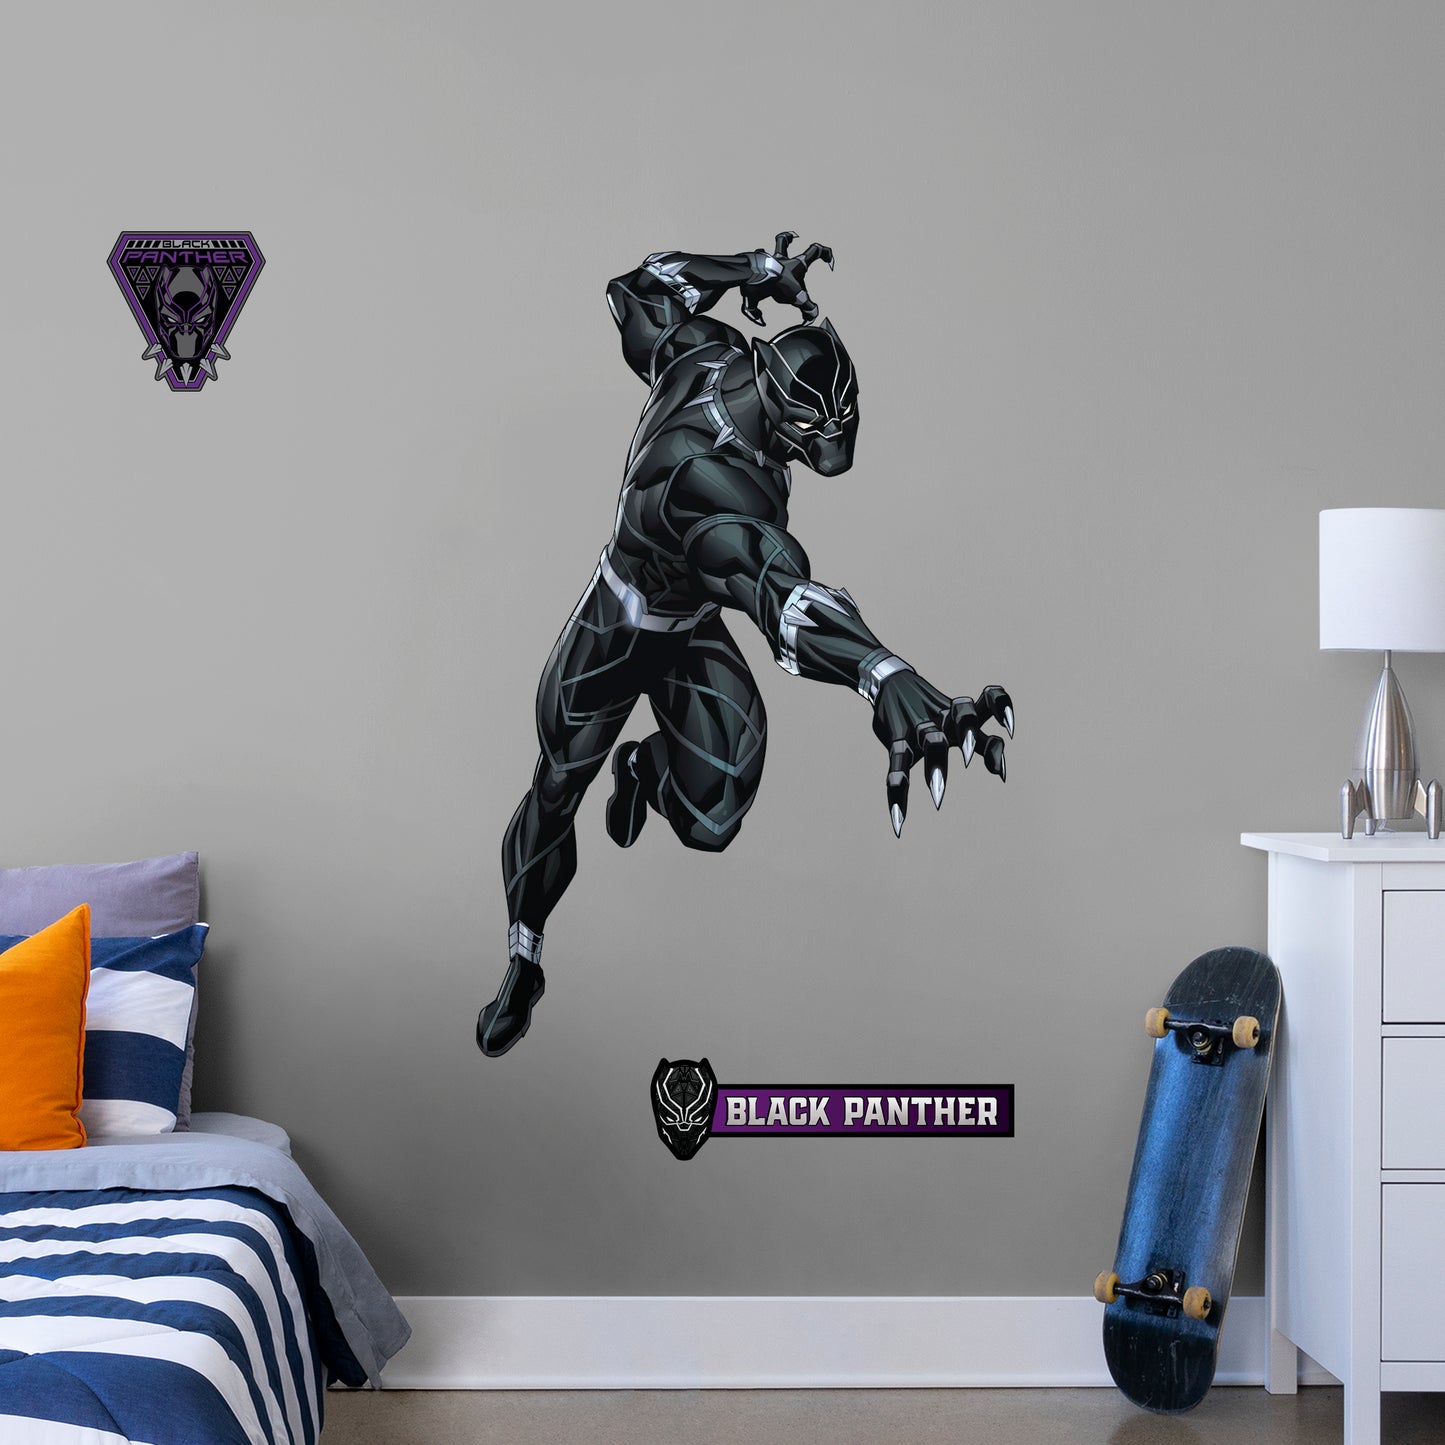 Giant Character + 2 Decals (37.5"W x 51"H)